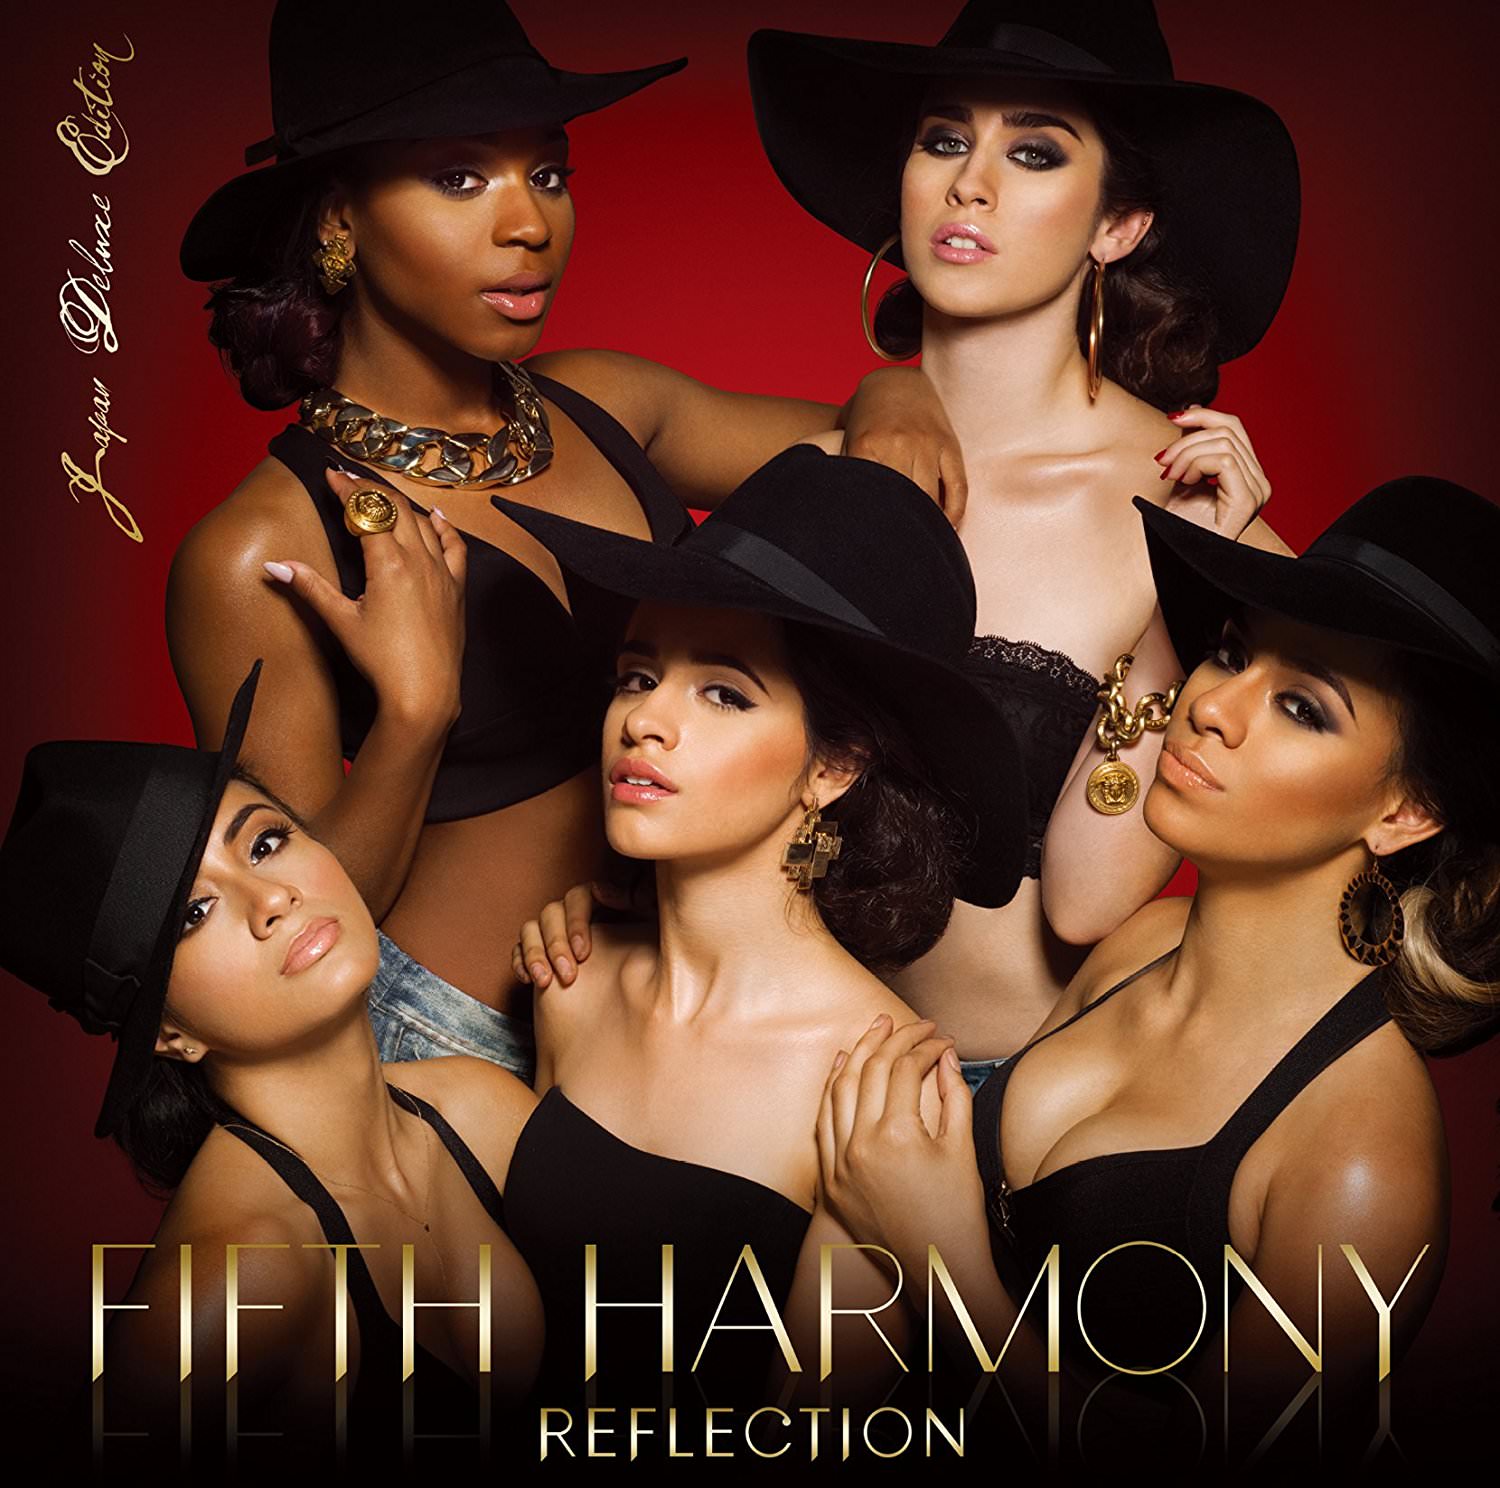 Fifth Harmony - Reflection {Deluxe Edition} (2015) [HDTracks FLAC 24bit/44,1kHz]